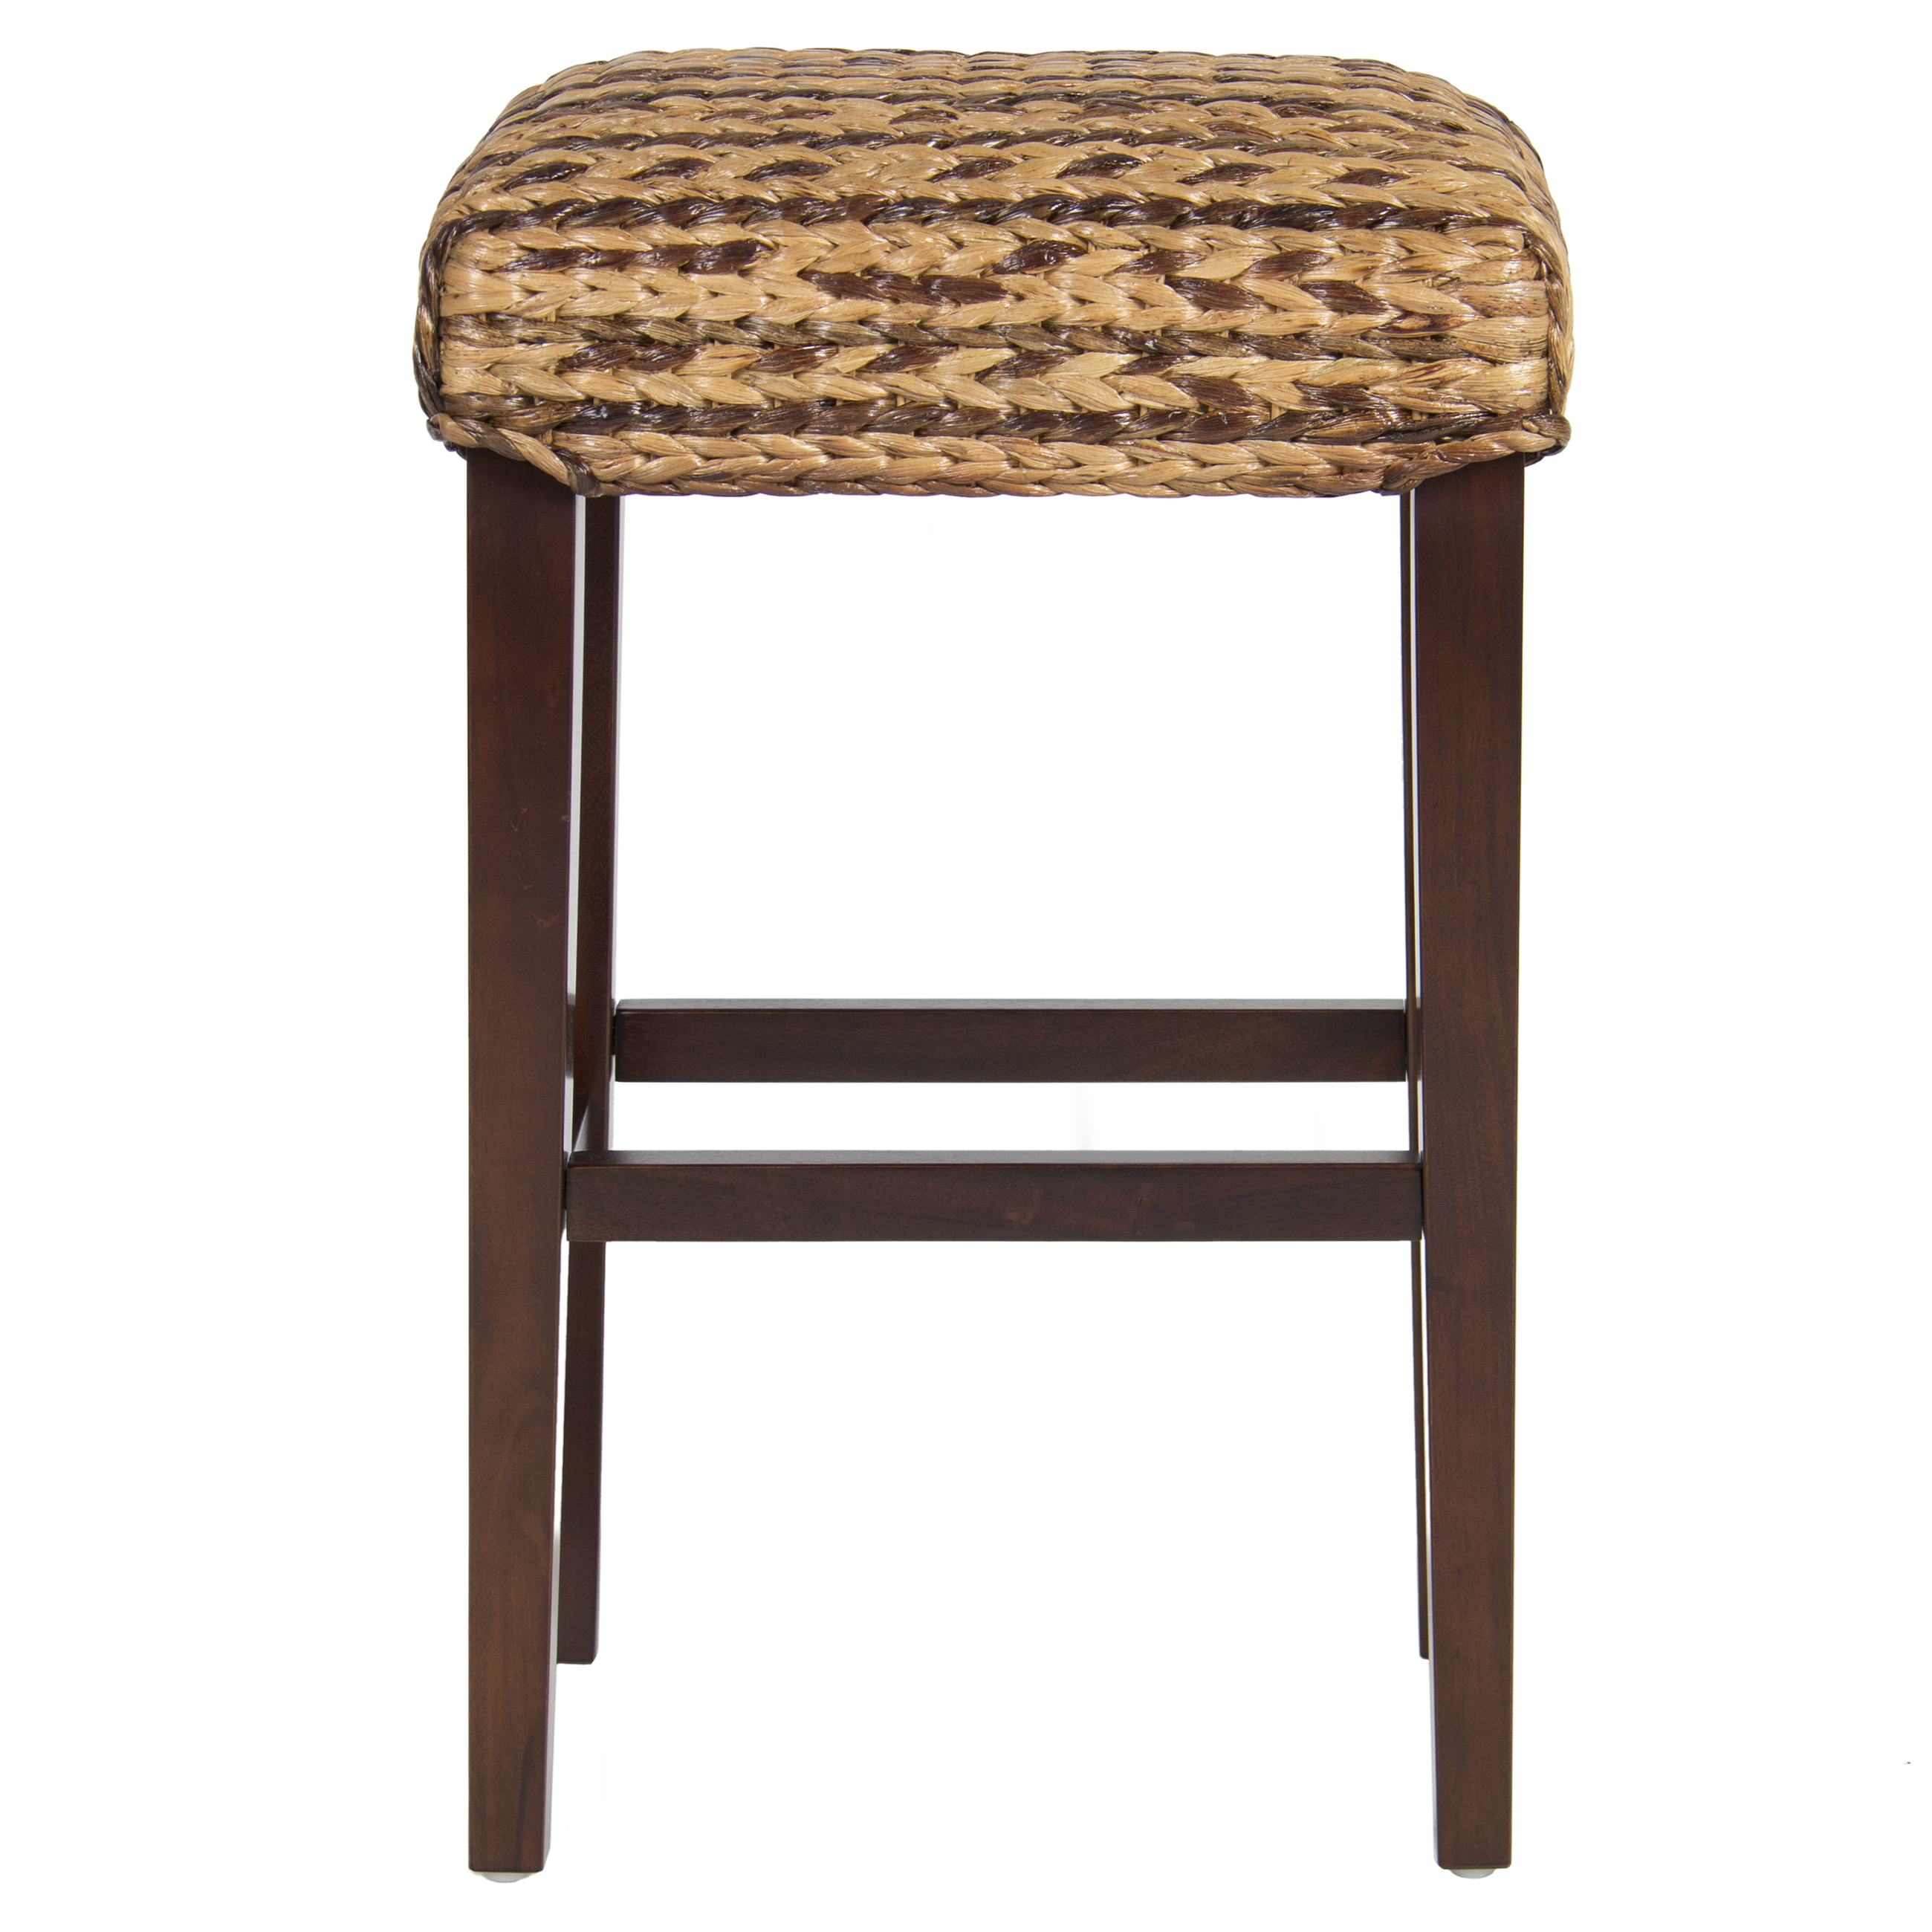 BCP Set of 2 Hand Woven Seagrass Bar Stools w/ Wood Frame - Brown | eBay